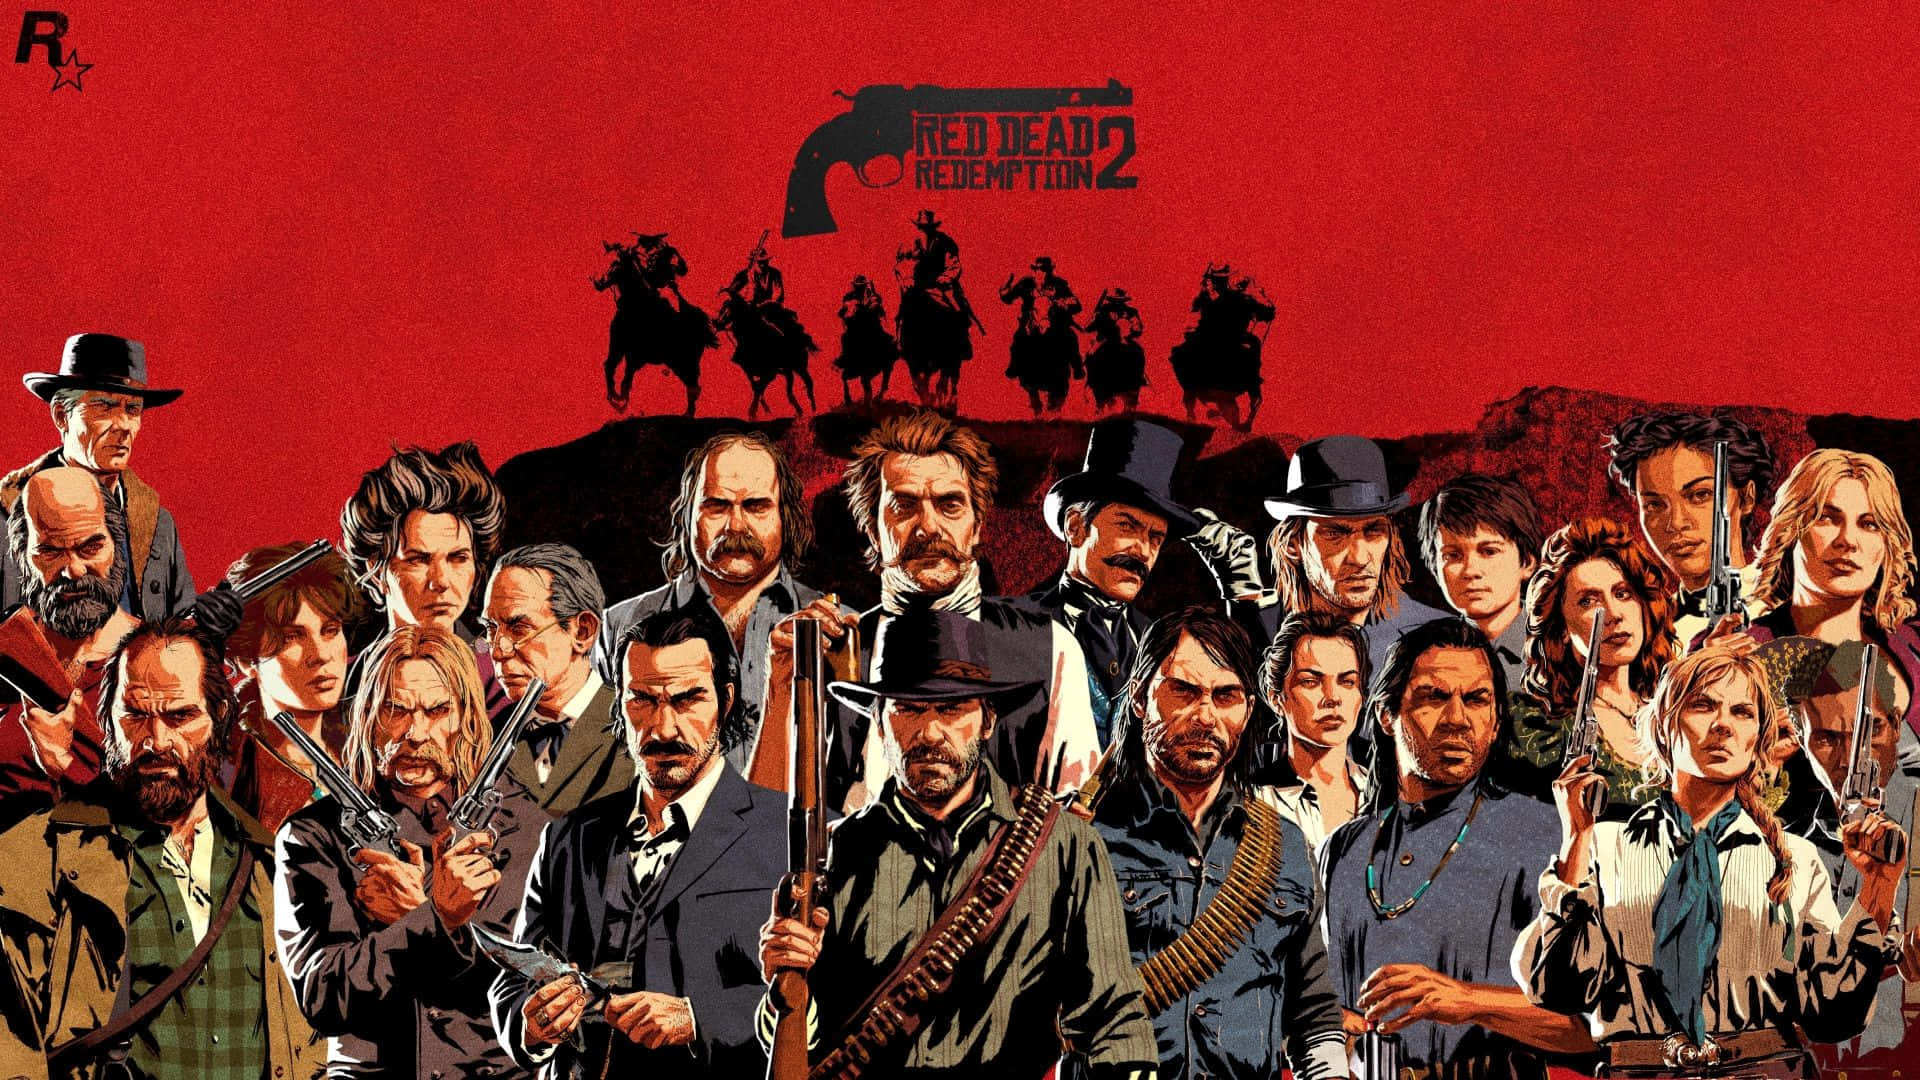 Red Dead Redemption Composite 2 Full Hd Wallpaper